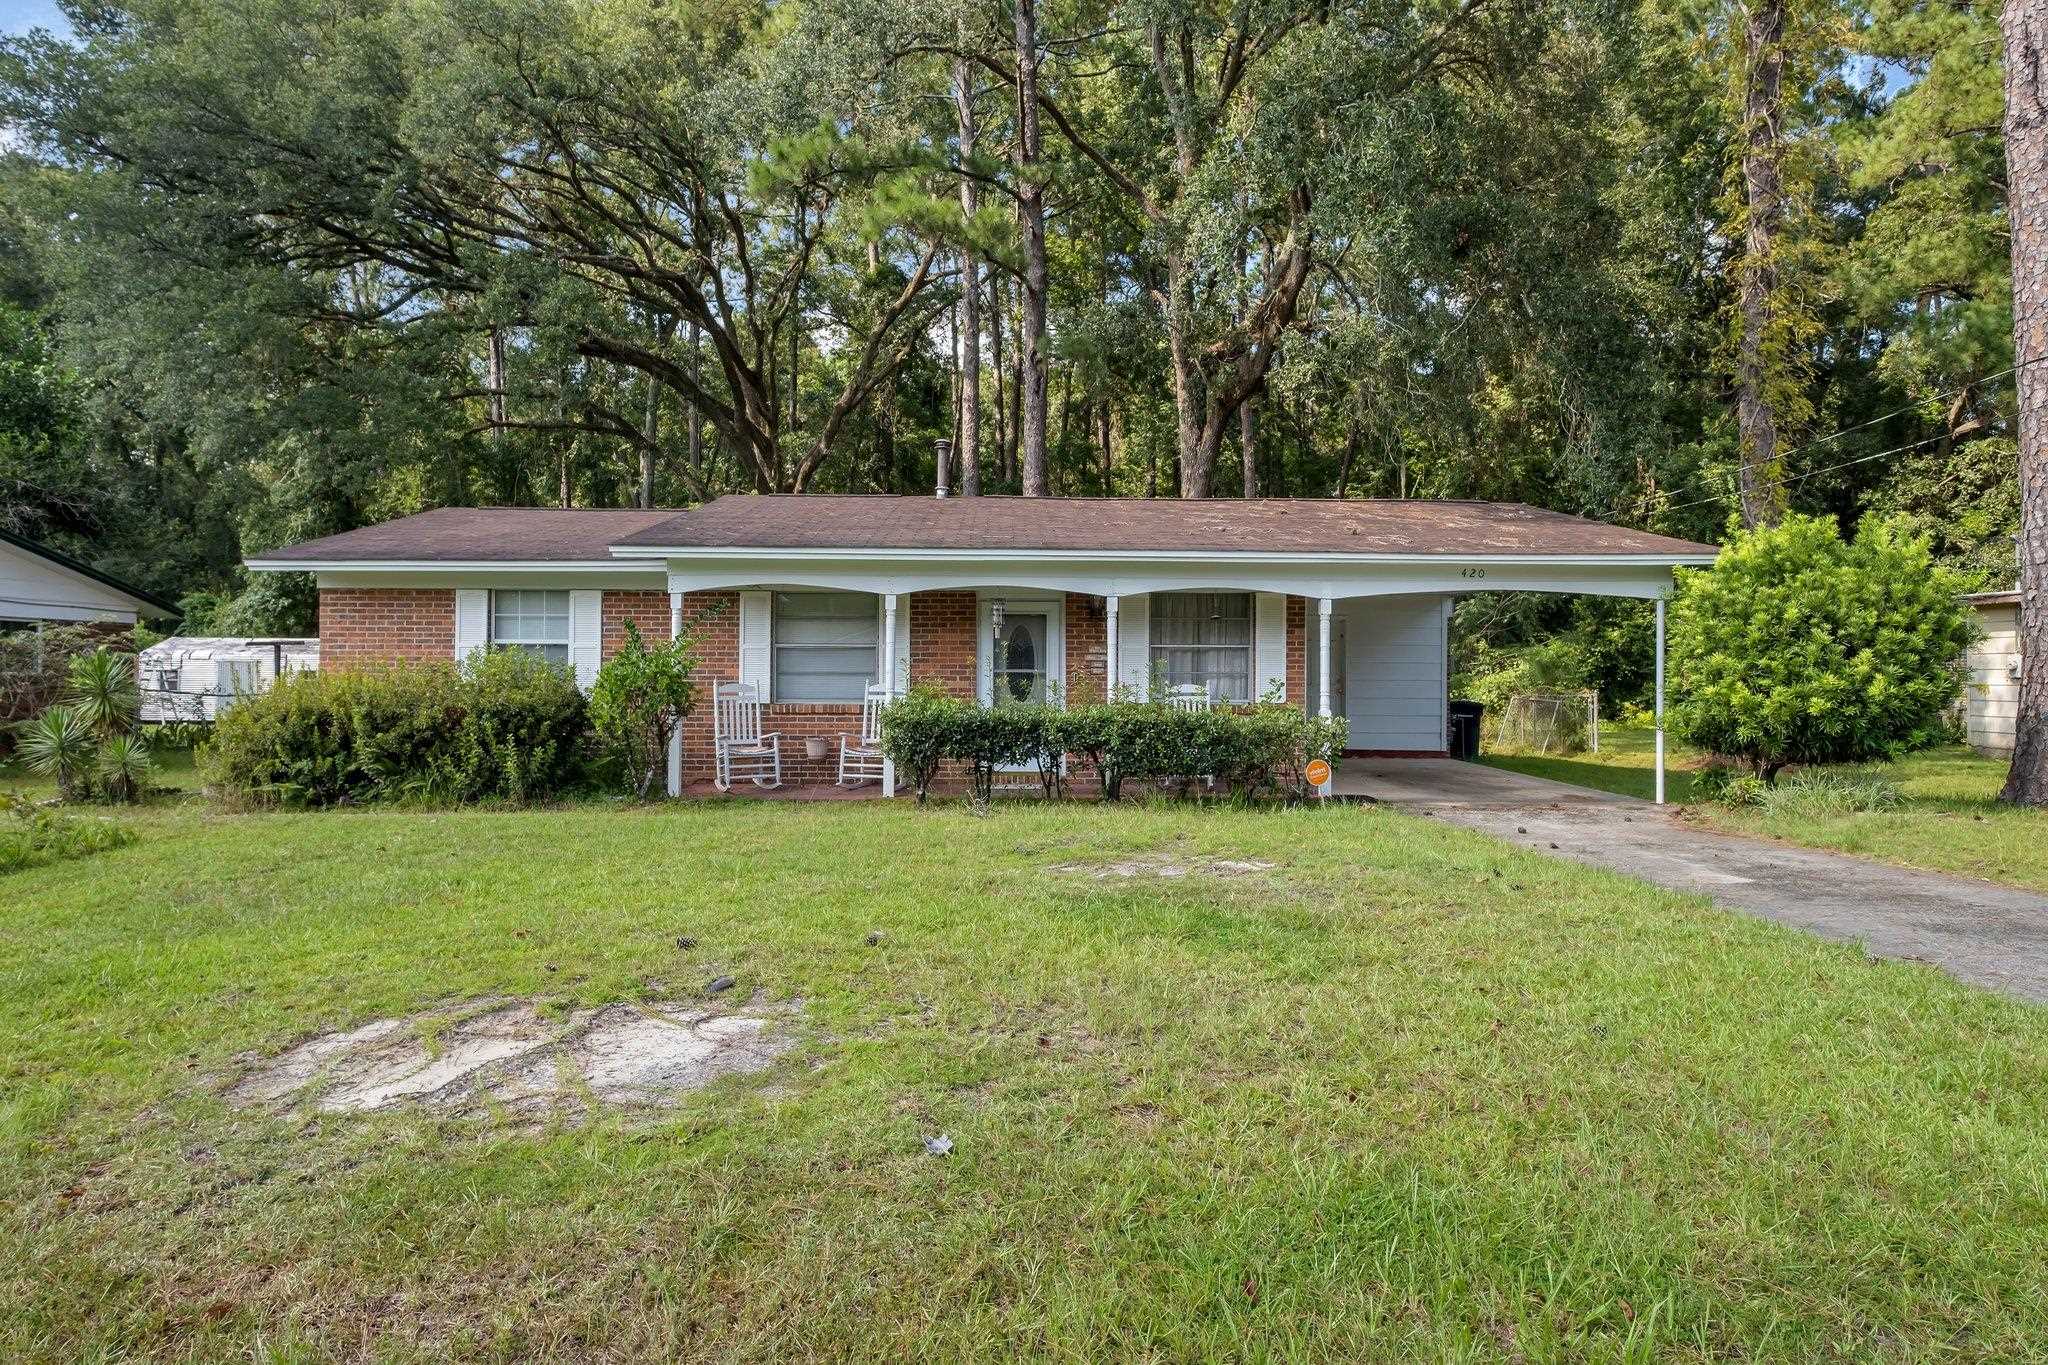 420 Dupont Drive,TALLAHASSEE,Florida 32305,3 Bedrooms Bedrooms,1 BathroomBathrooms,Detached single family,420 Dupont Drive,368546